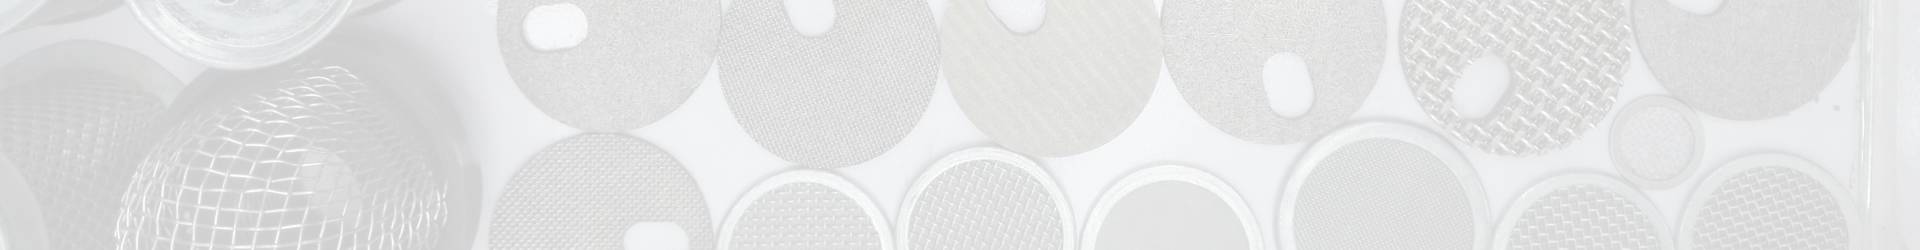 Various sintered metal filter elements are displayed in various shapes and sizes.